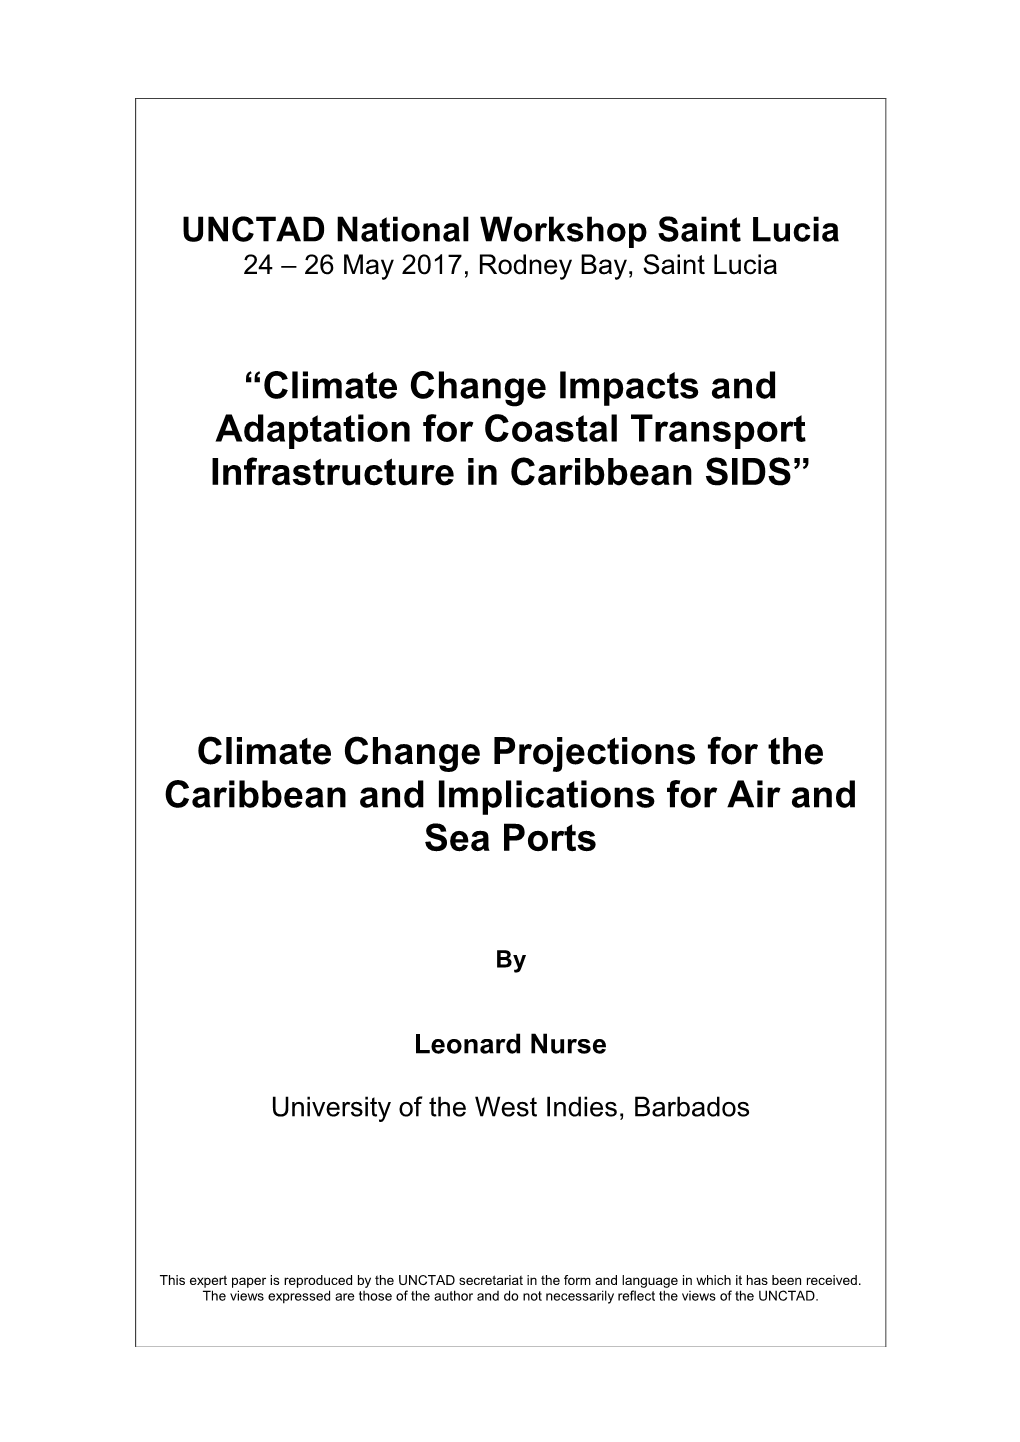 Climate Change Projections for the Caribbean and Implications for Air and Sea Ports